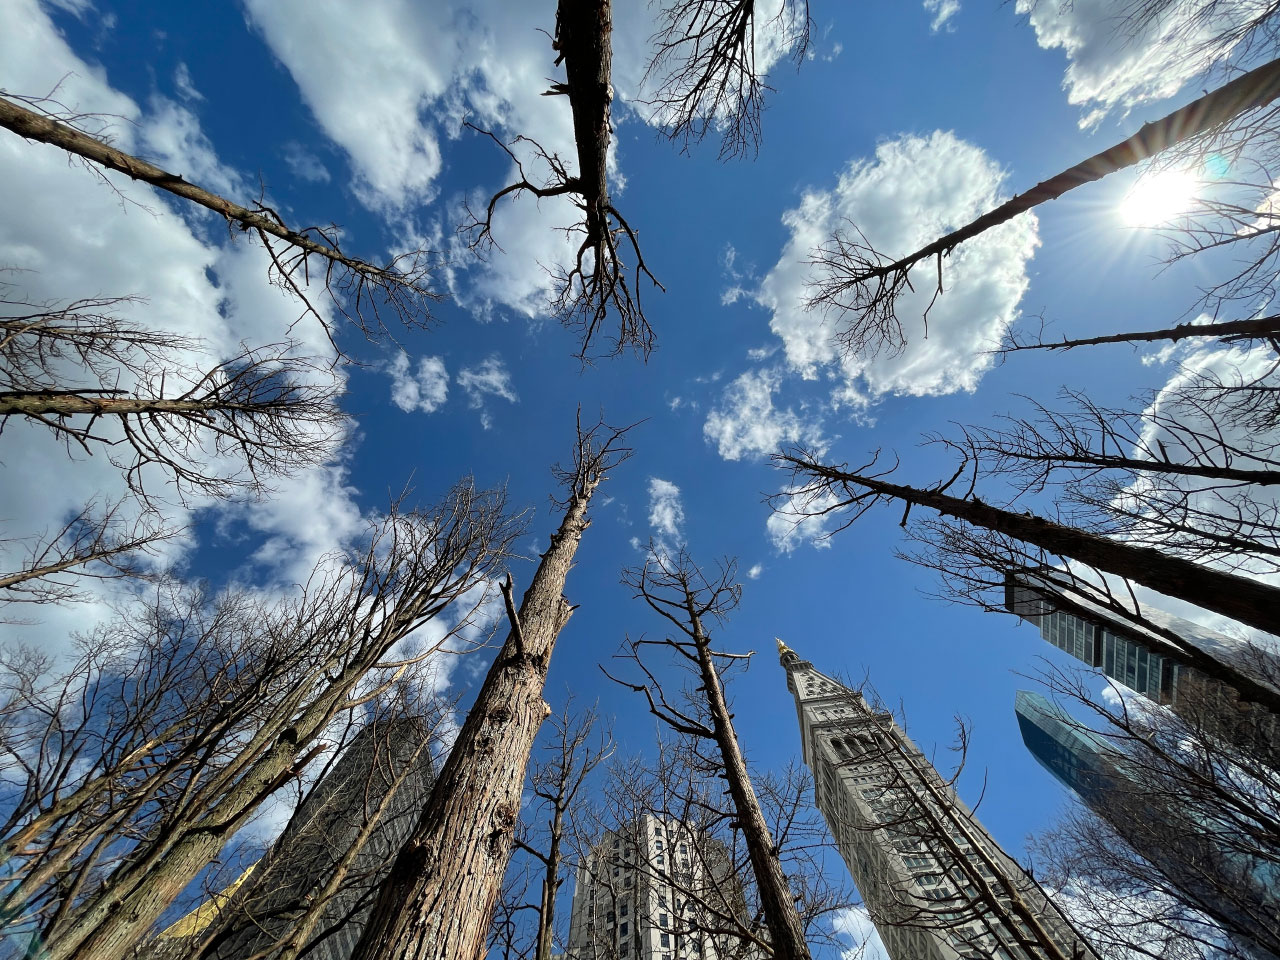 Maya Lin Plants a ‘Ghost Forest” in the Middle of Manhattan